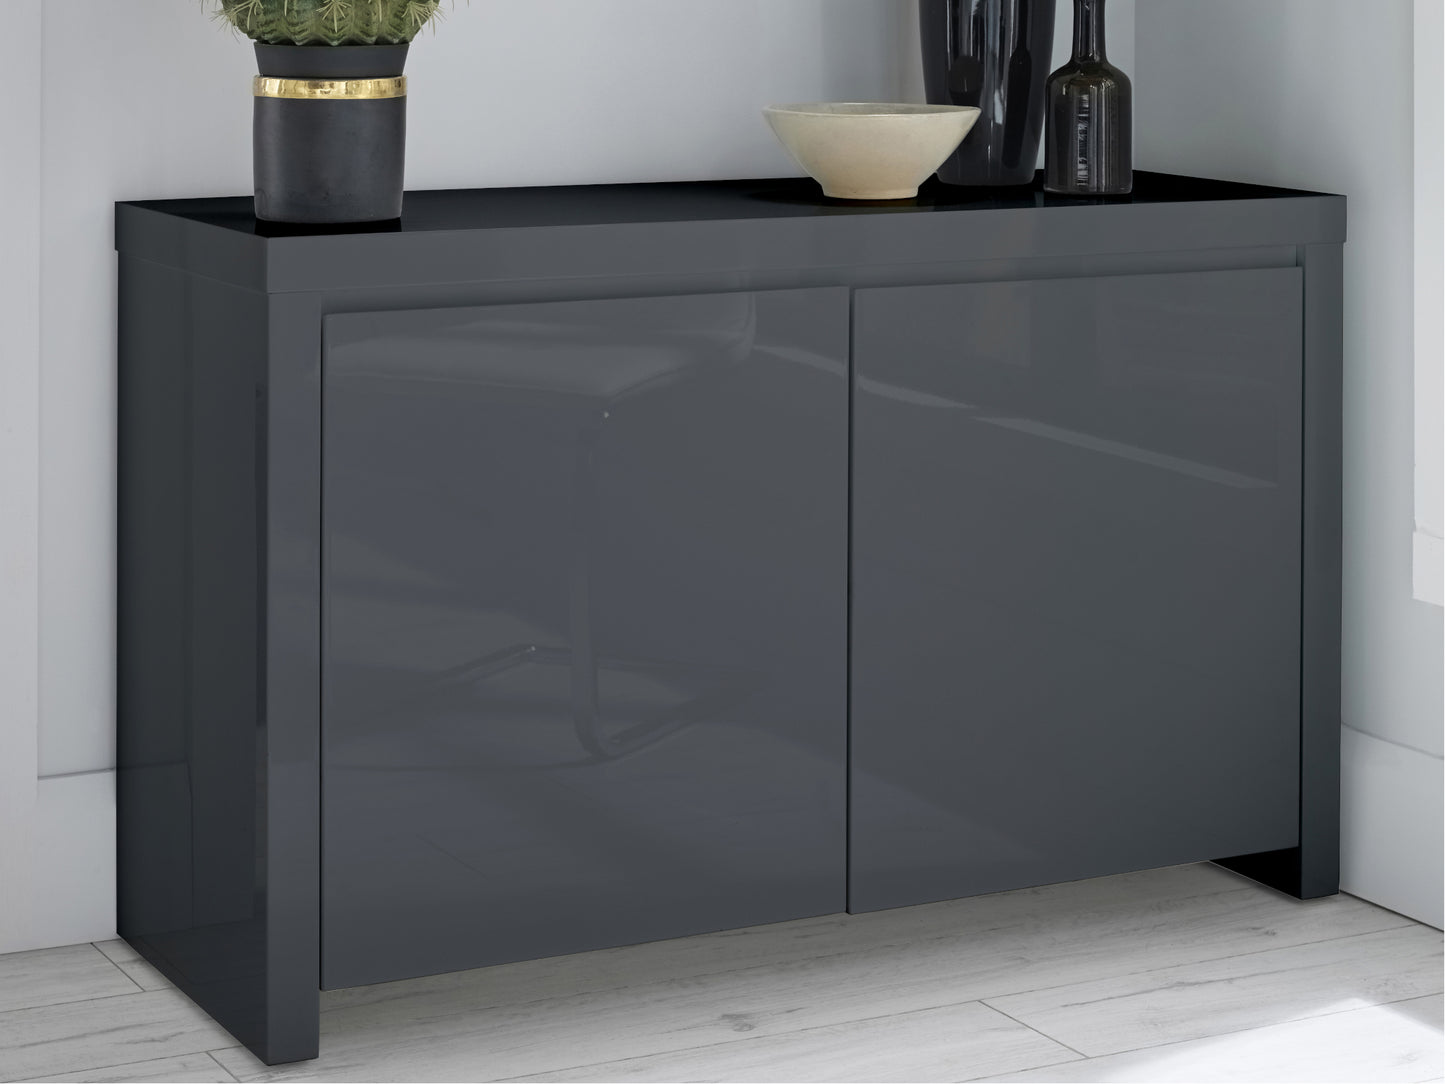 Puro Sideboard in Charcoal